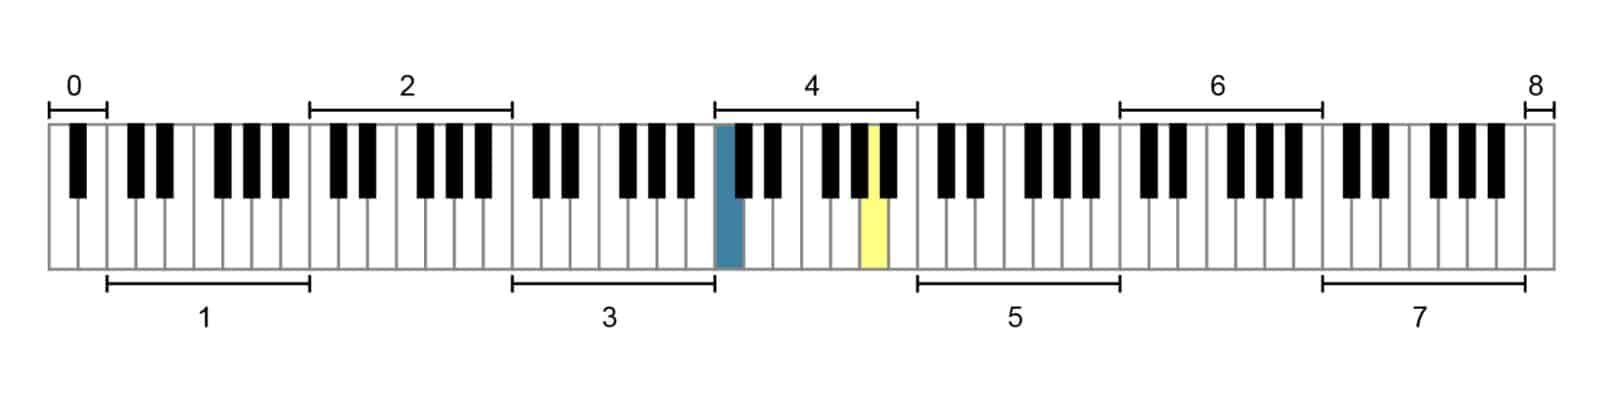 The seven octaves divided according to ASPN 